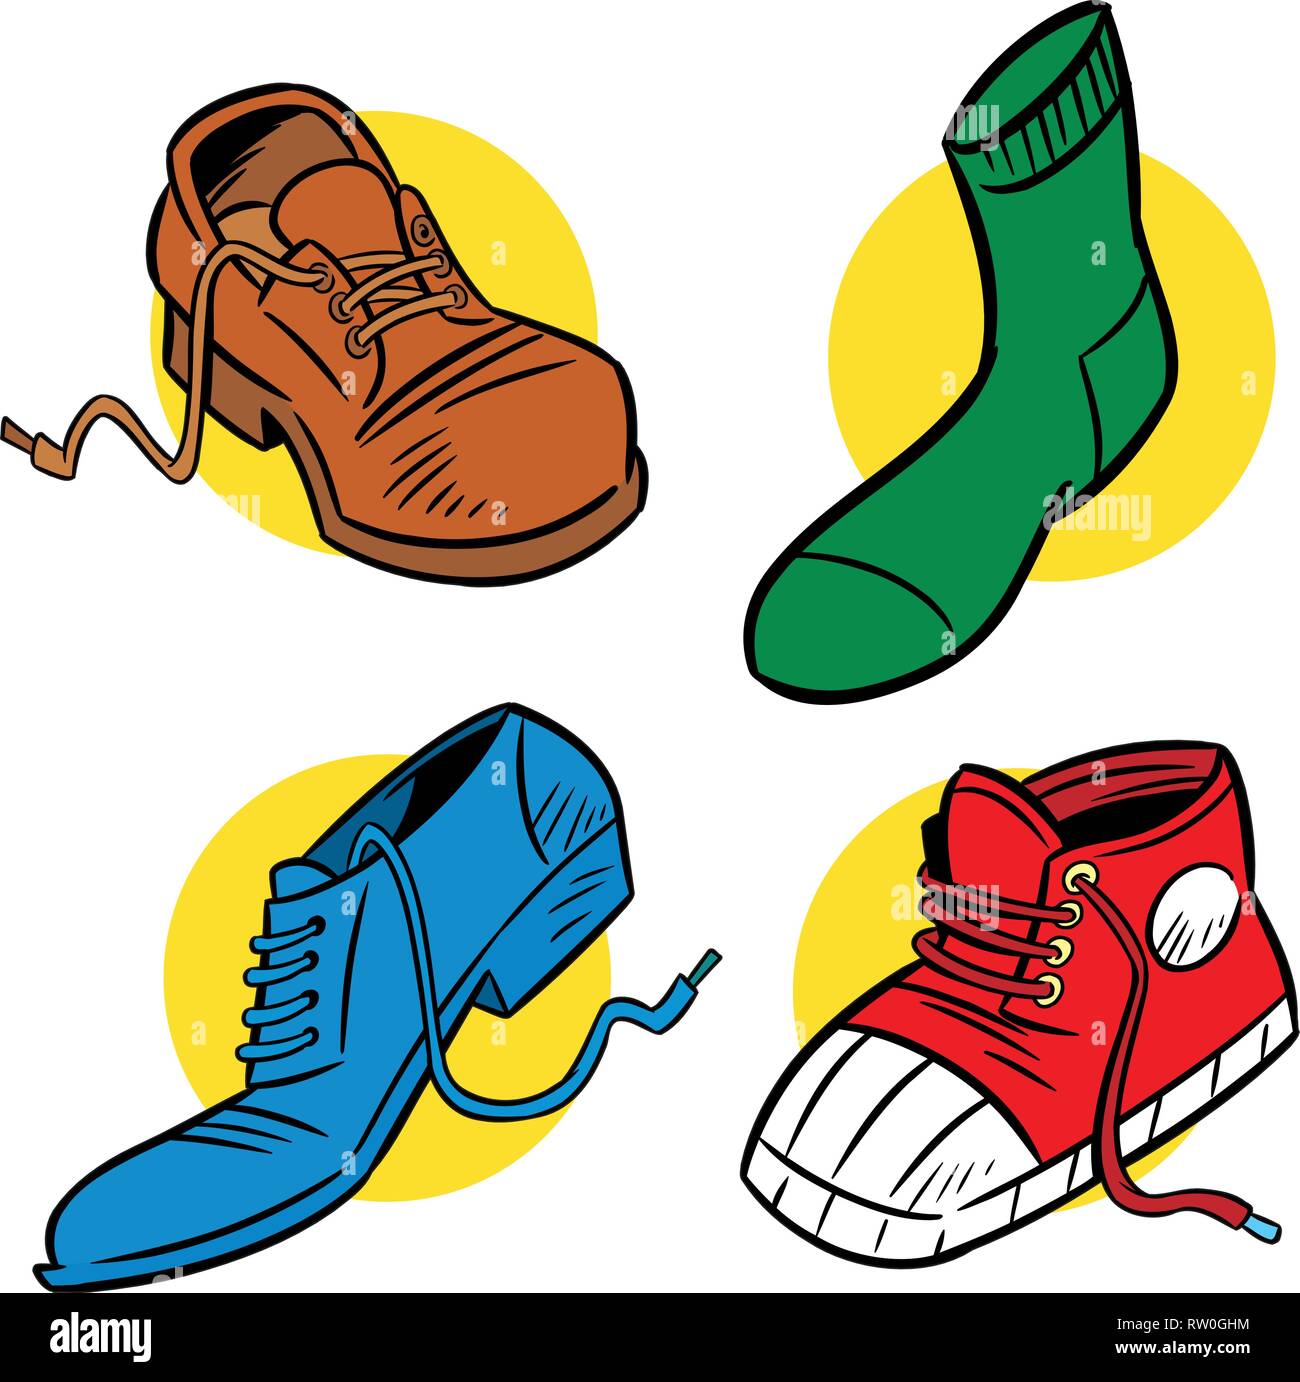 The illustration shows several shoes. Illustration is presented in cartoon style on separate layers. Stock Vector